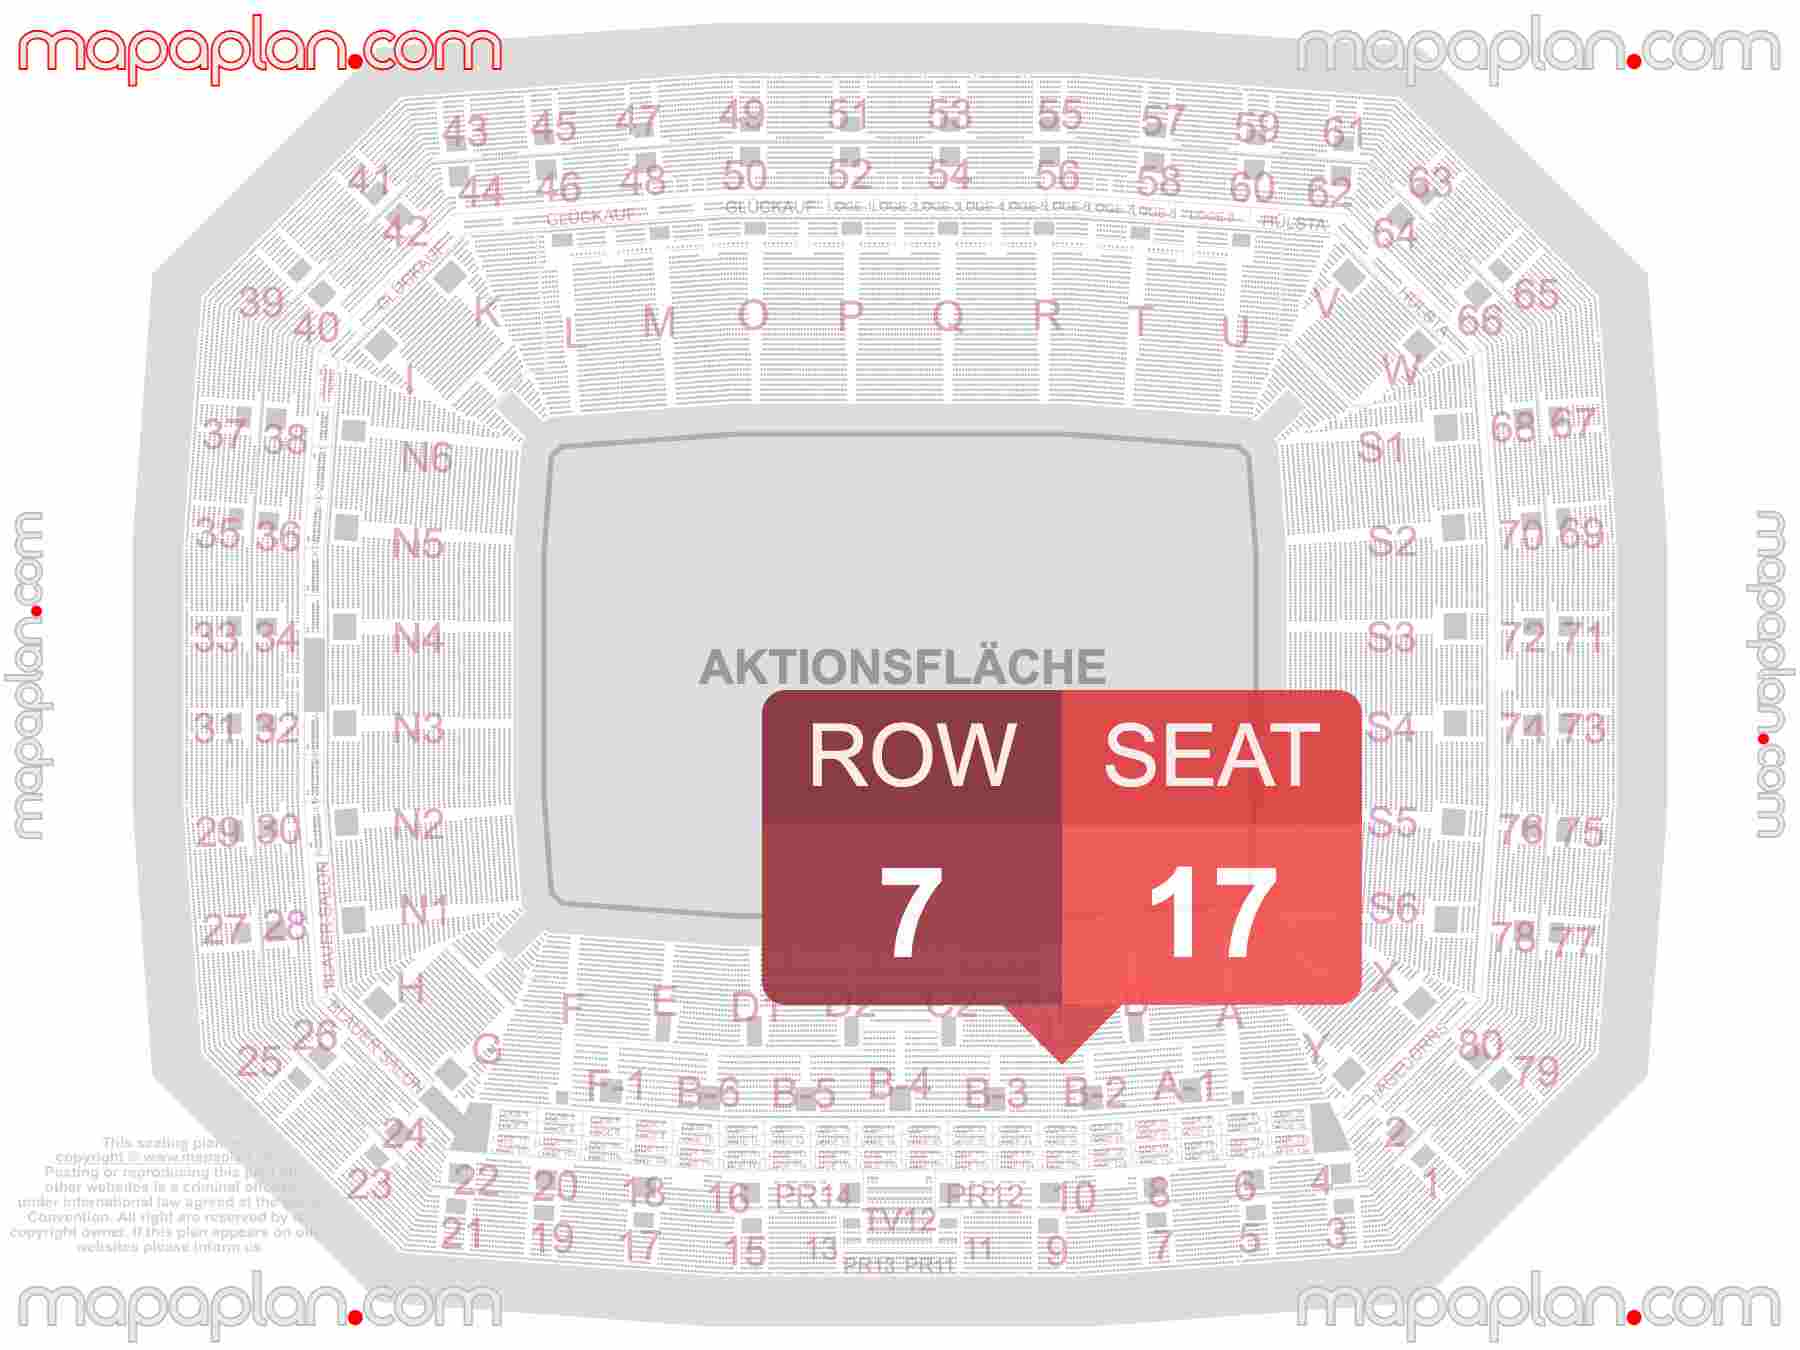 Gelsenkirchen Veltins Arena AufSchalke seating plan Concerts & Monster Jam find best seats row numbering system map showing how many seats per row - Individual find my seat virtual locator